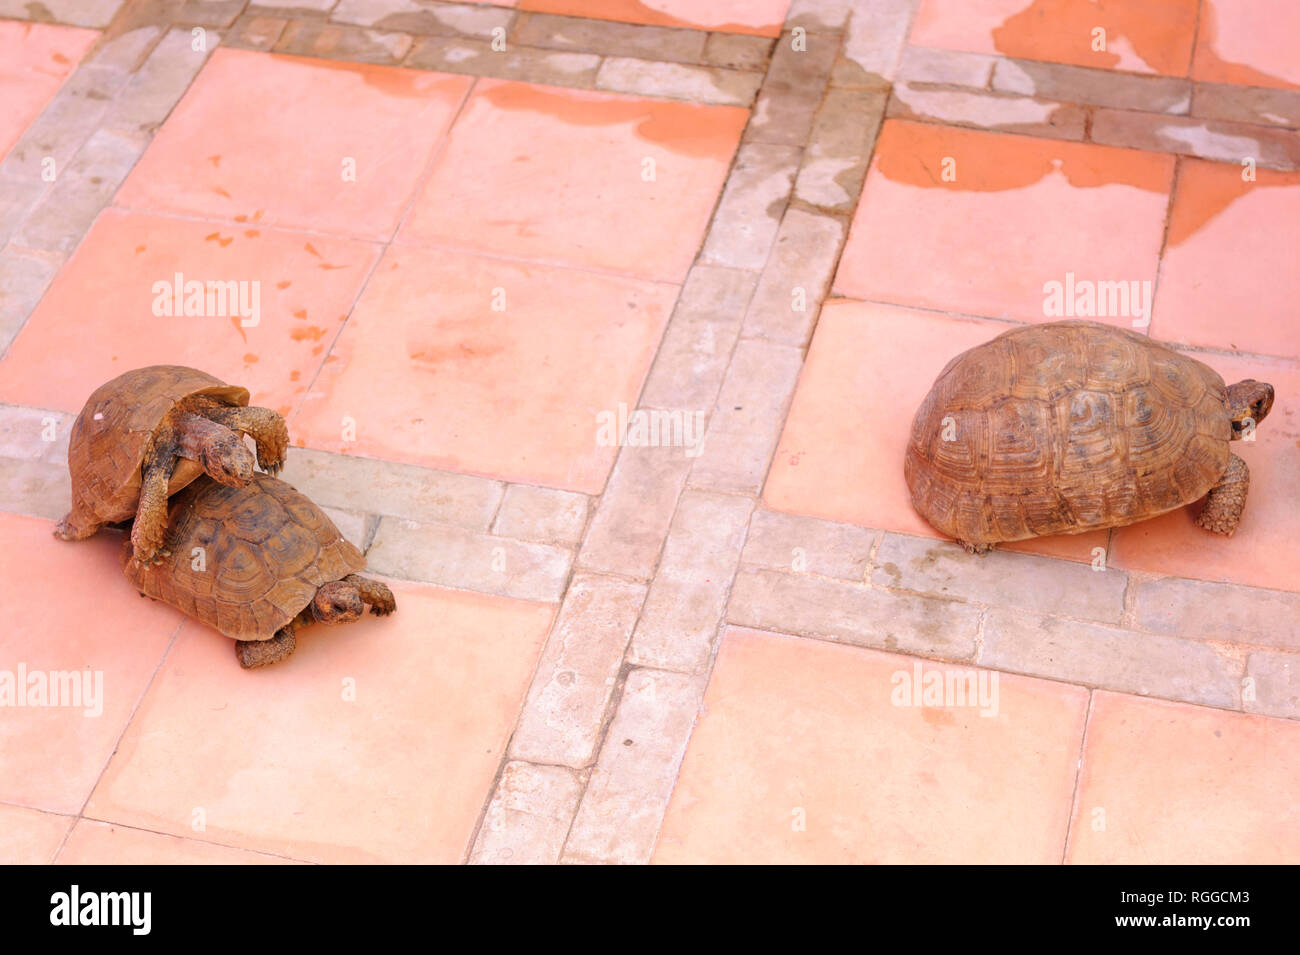 05-03-15, Marrakech, Morocco. The Riad Porte Royale. Two tortoises mating on the terrace with a third tortoise walking away.  Photo: © Simon Grosset Stock Photo